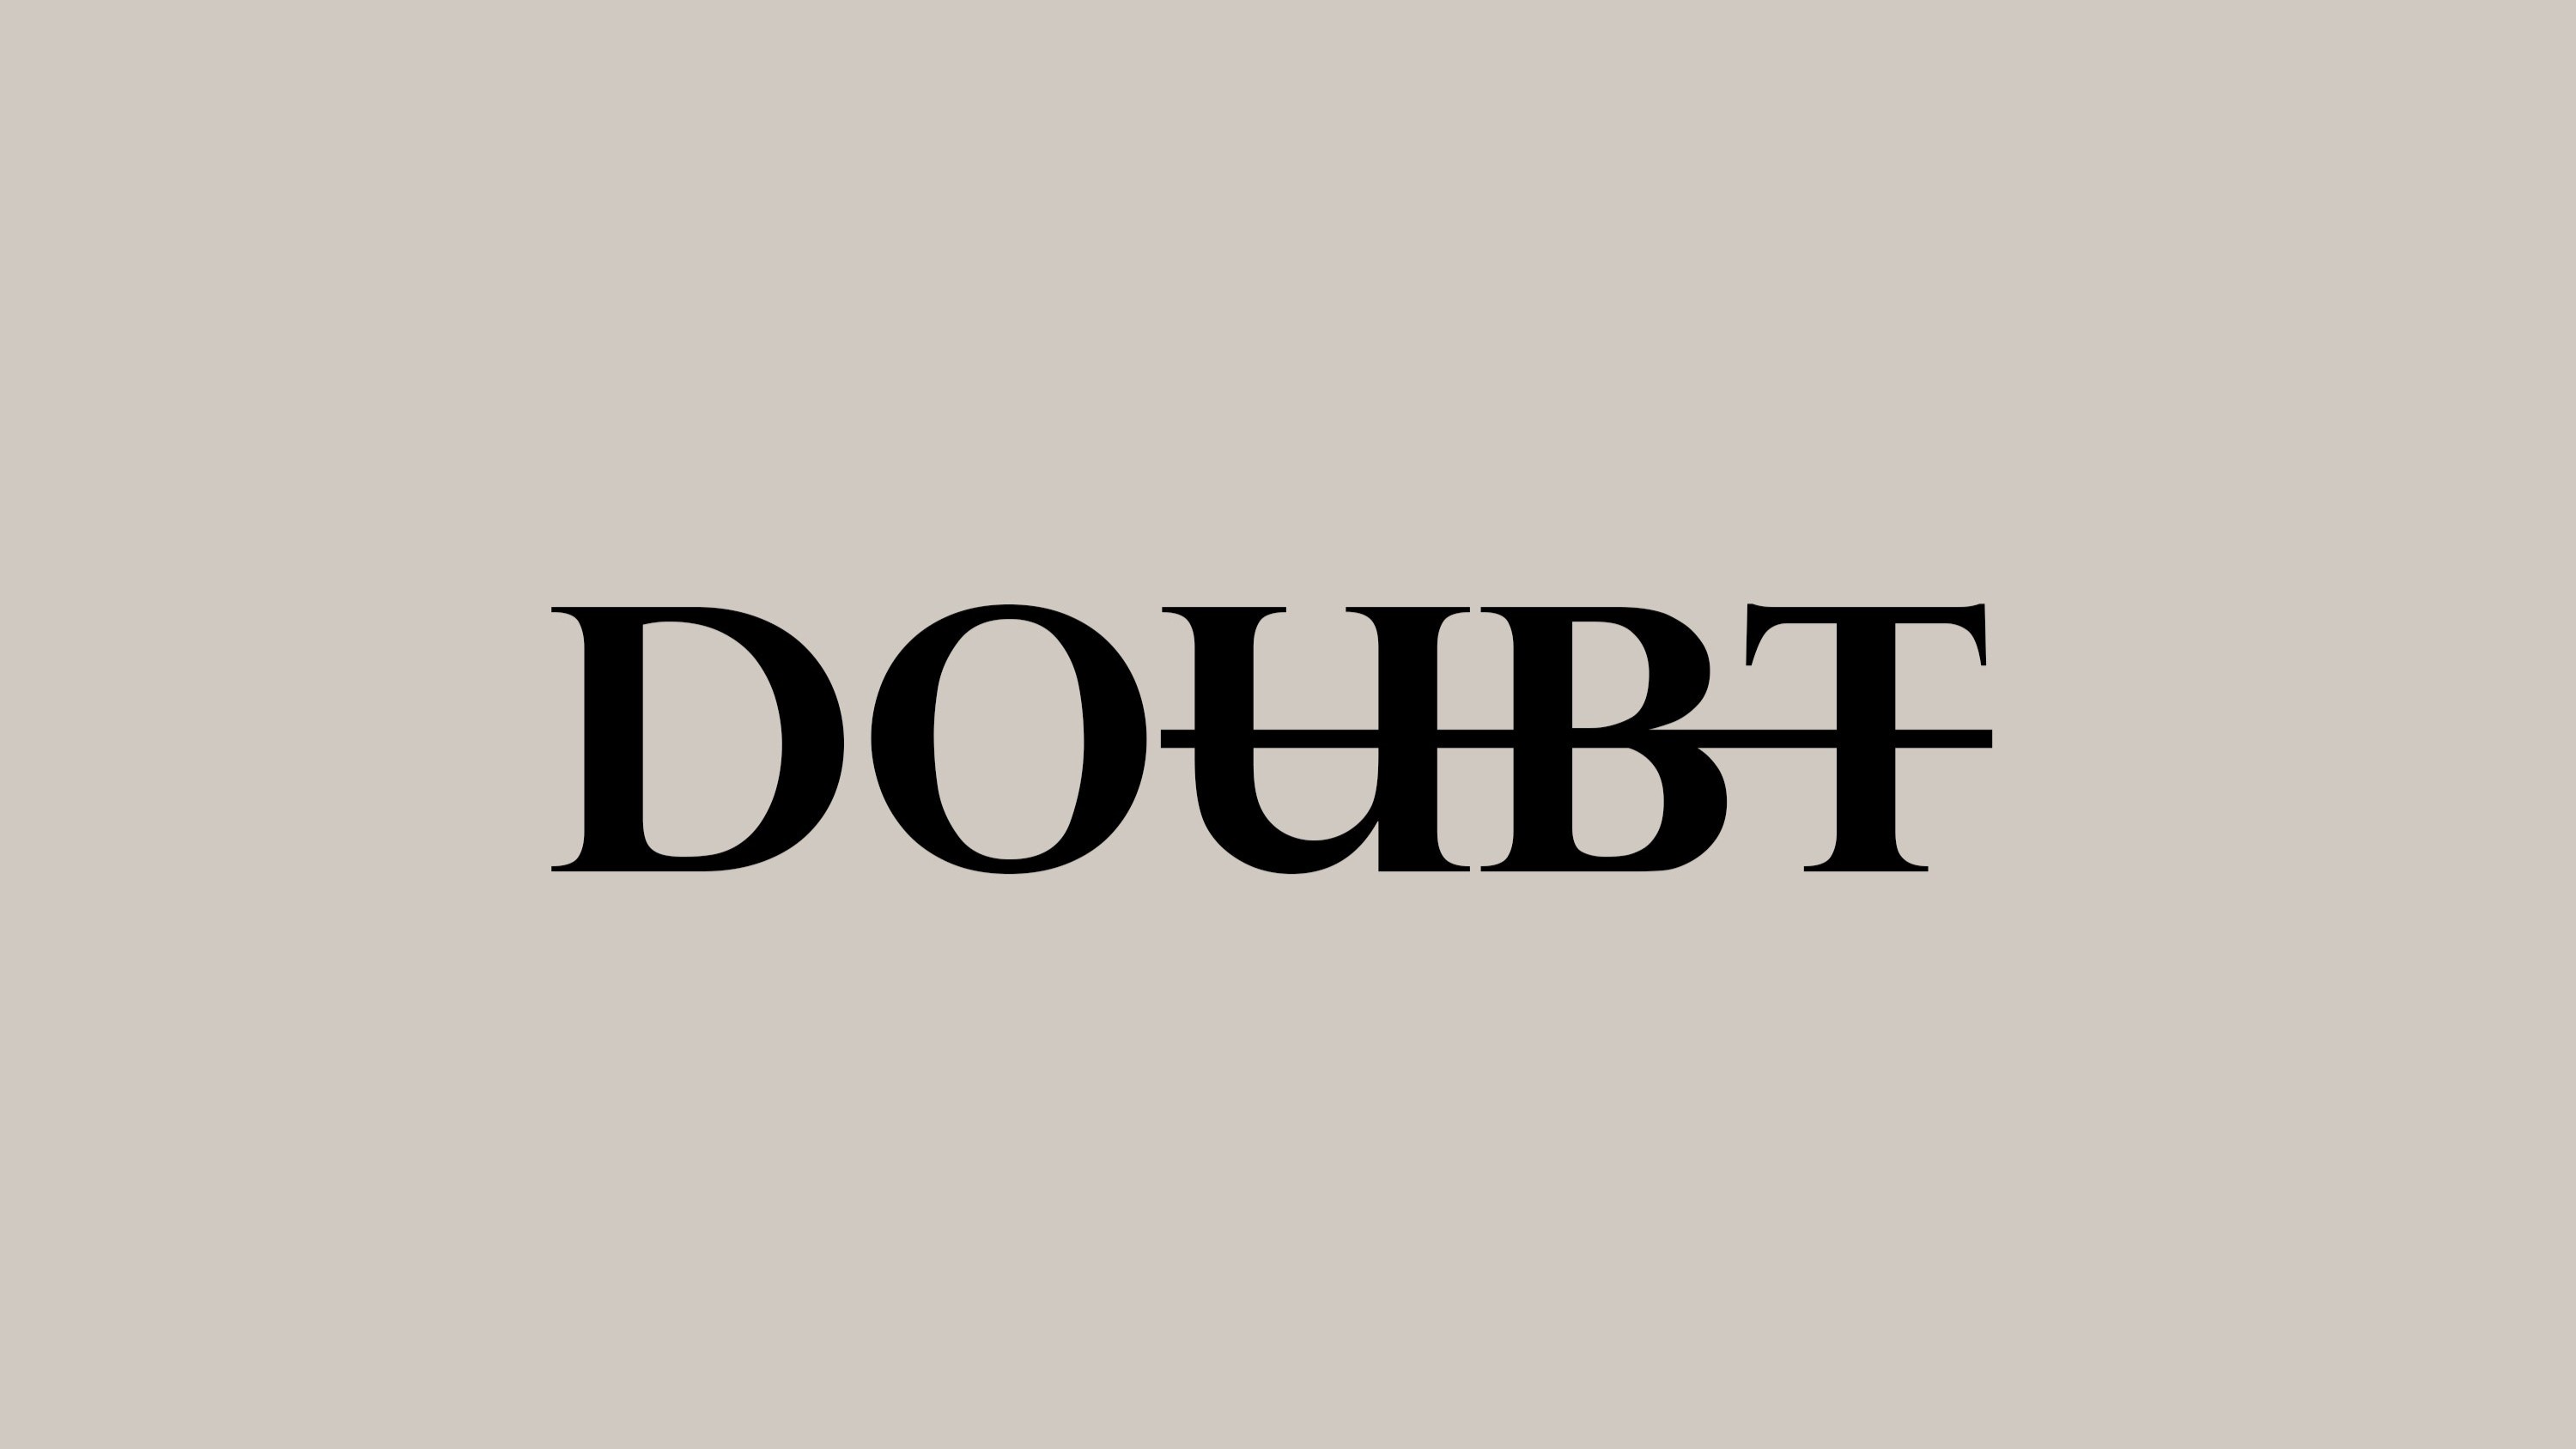 The word 'doubt' with the 'ubt' crossed out